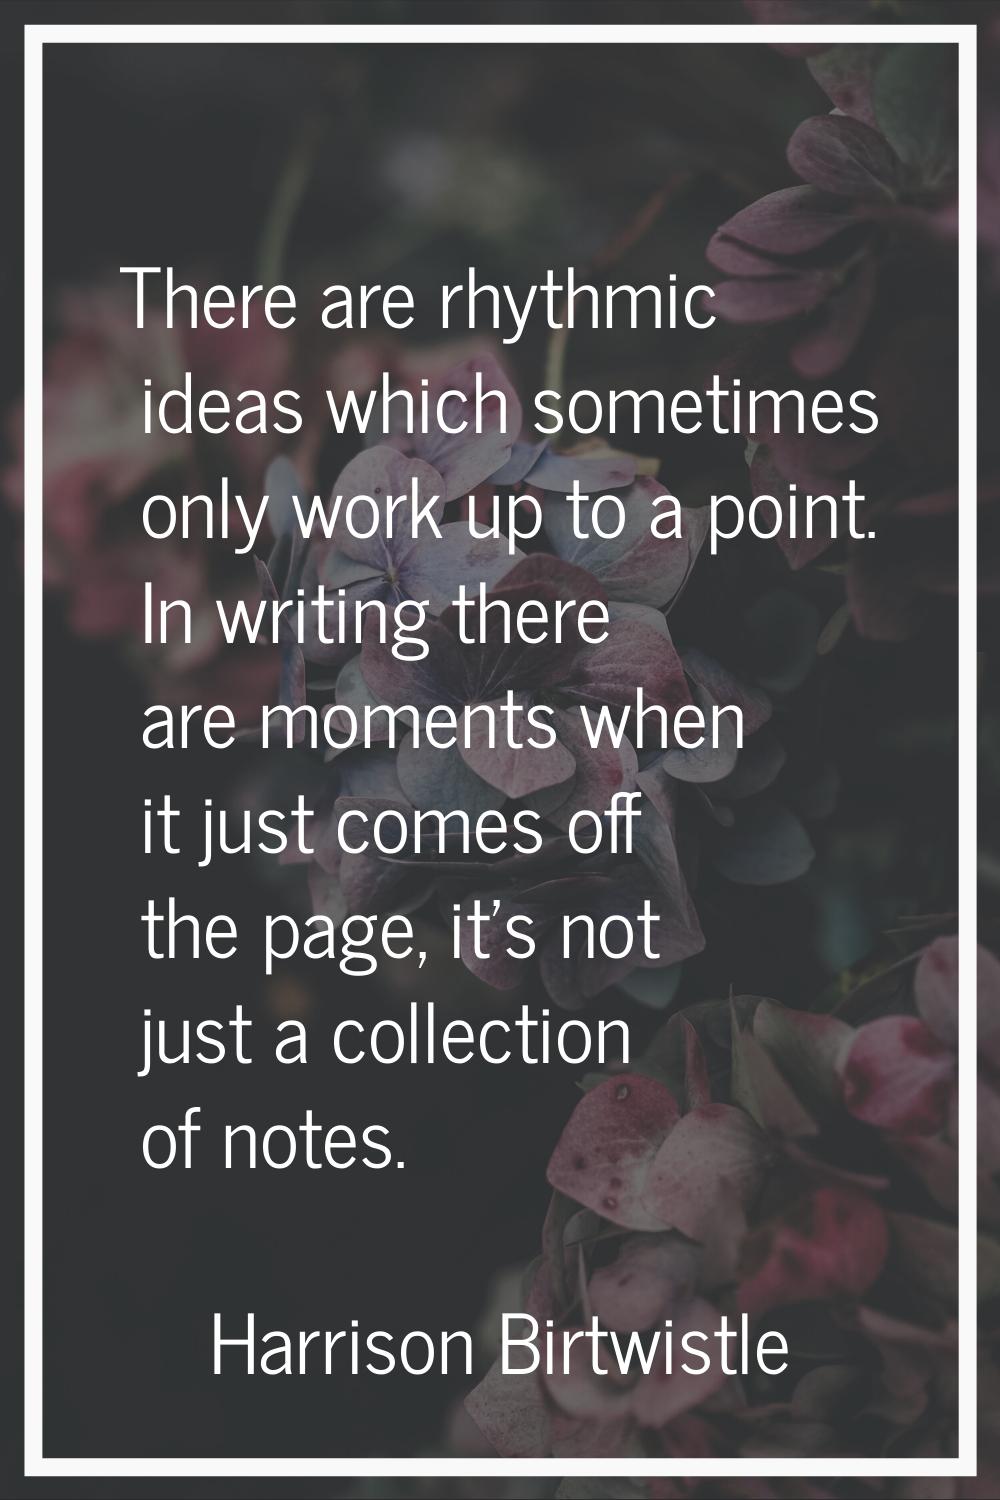 There are rhythmic ideas which sometimes only work up to a point. In writing there are moments when